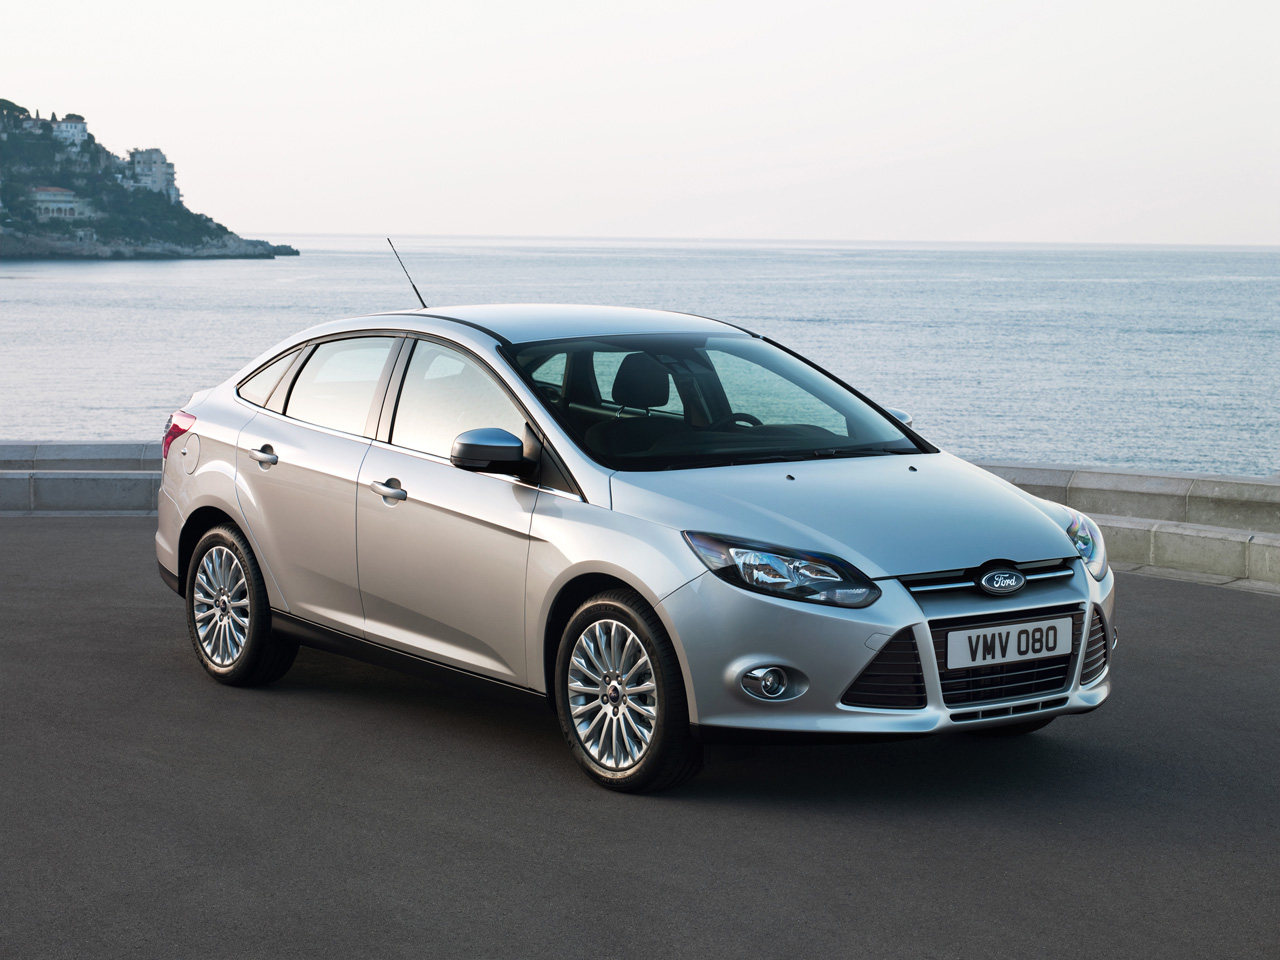 BHP: News: Ford Focus 2012 Gets a Green Light in Malaysia